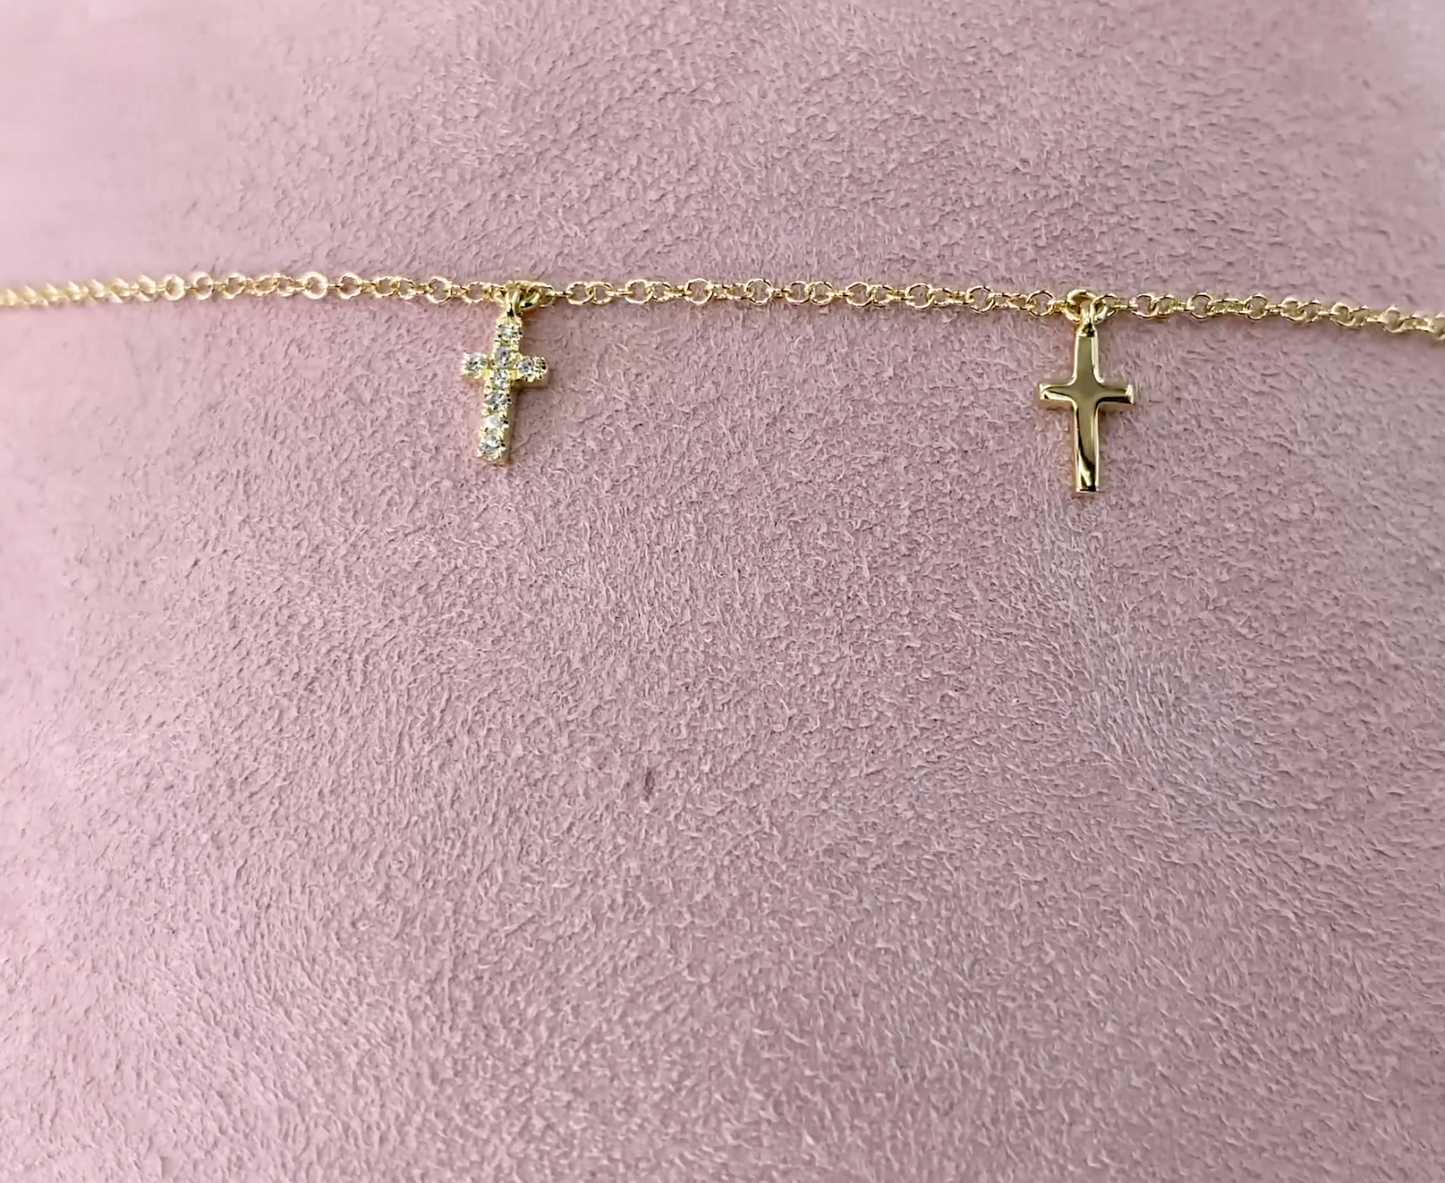 14k Gold 0.09 CT Diamond Dangling Cross Shaker Necklace Natural Round Cut